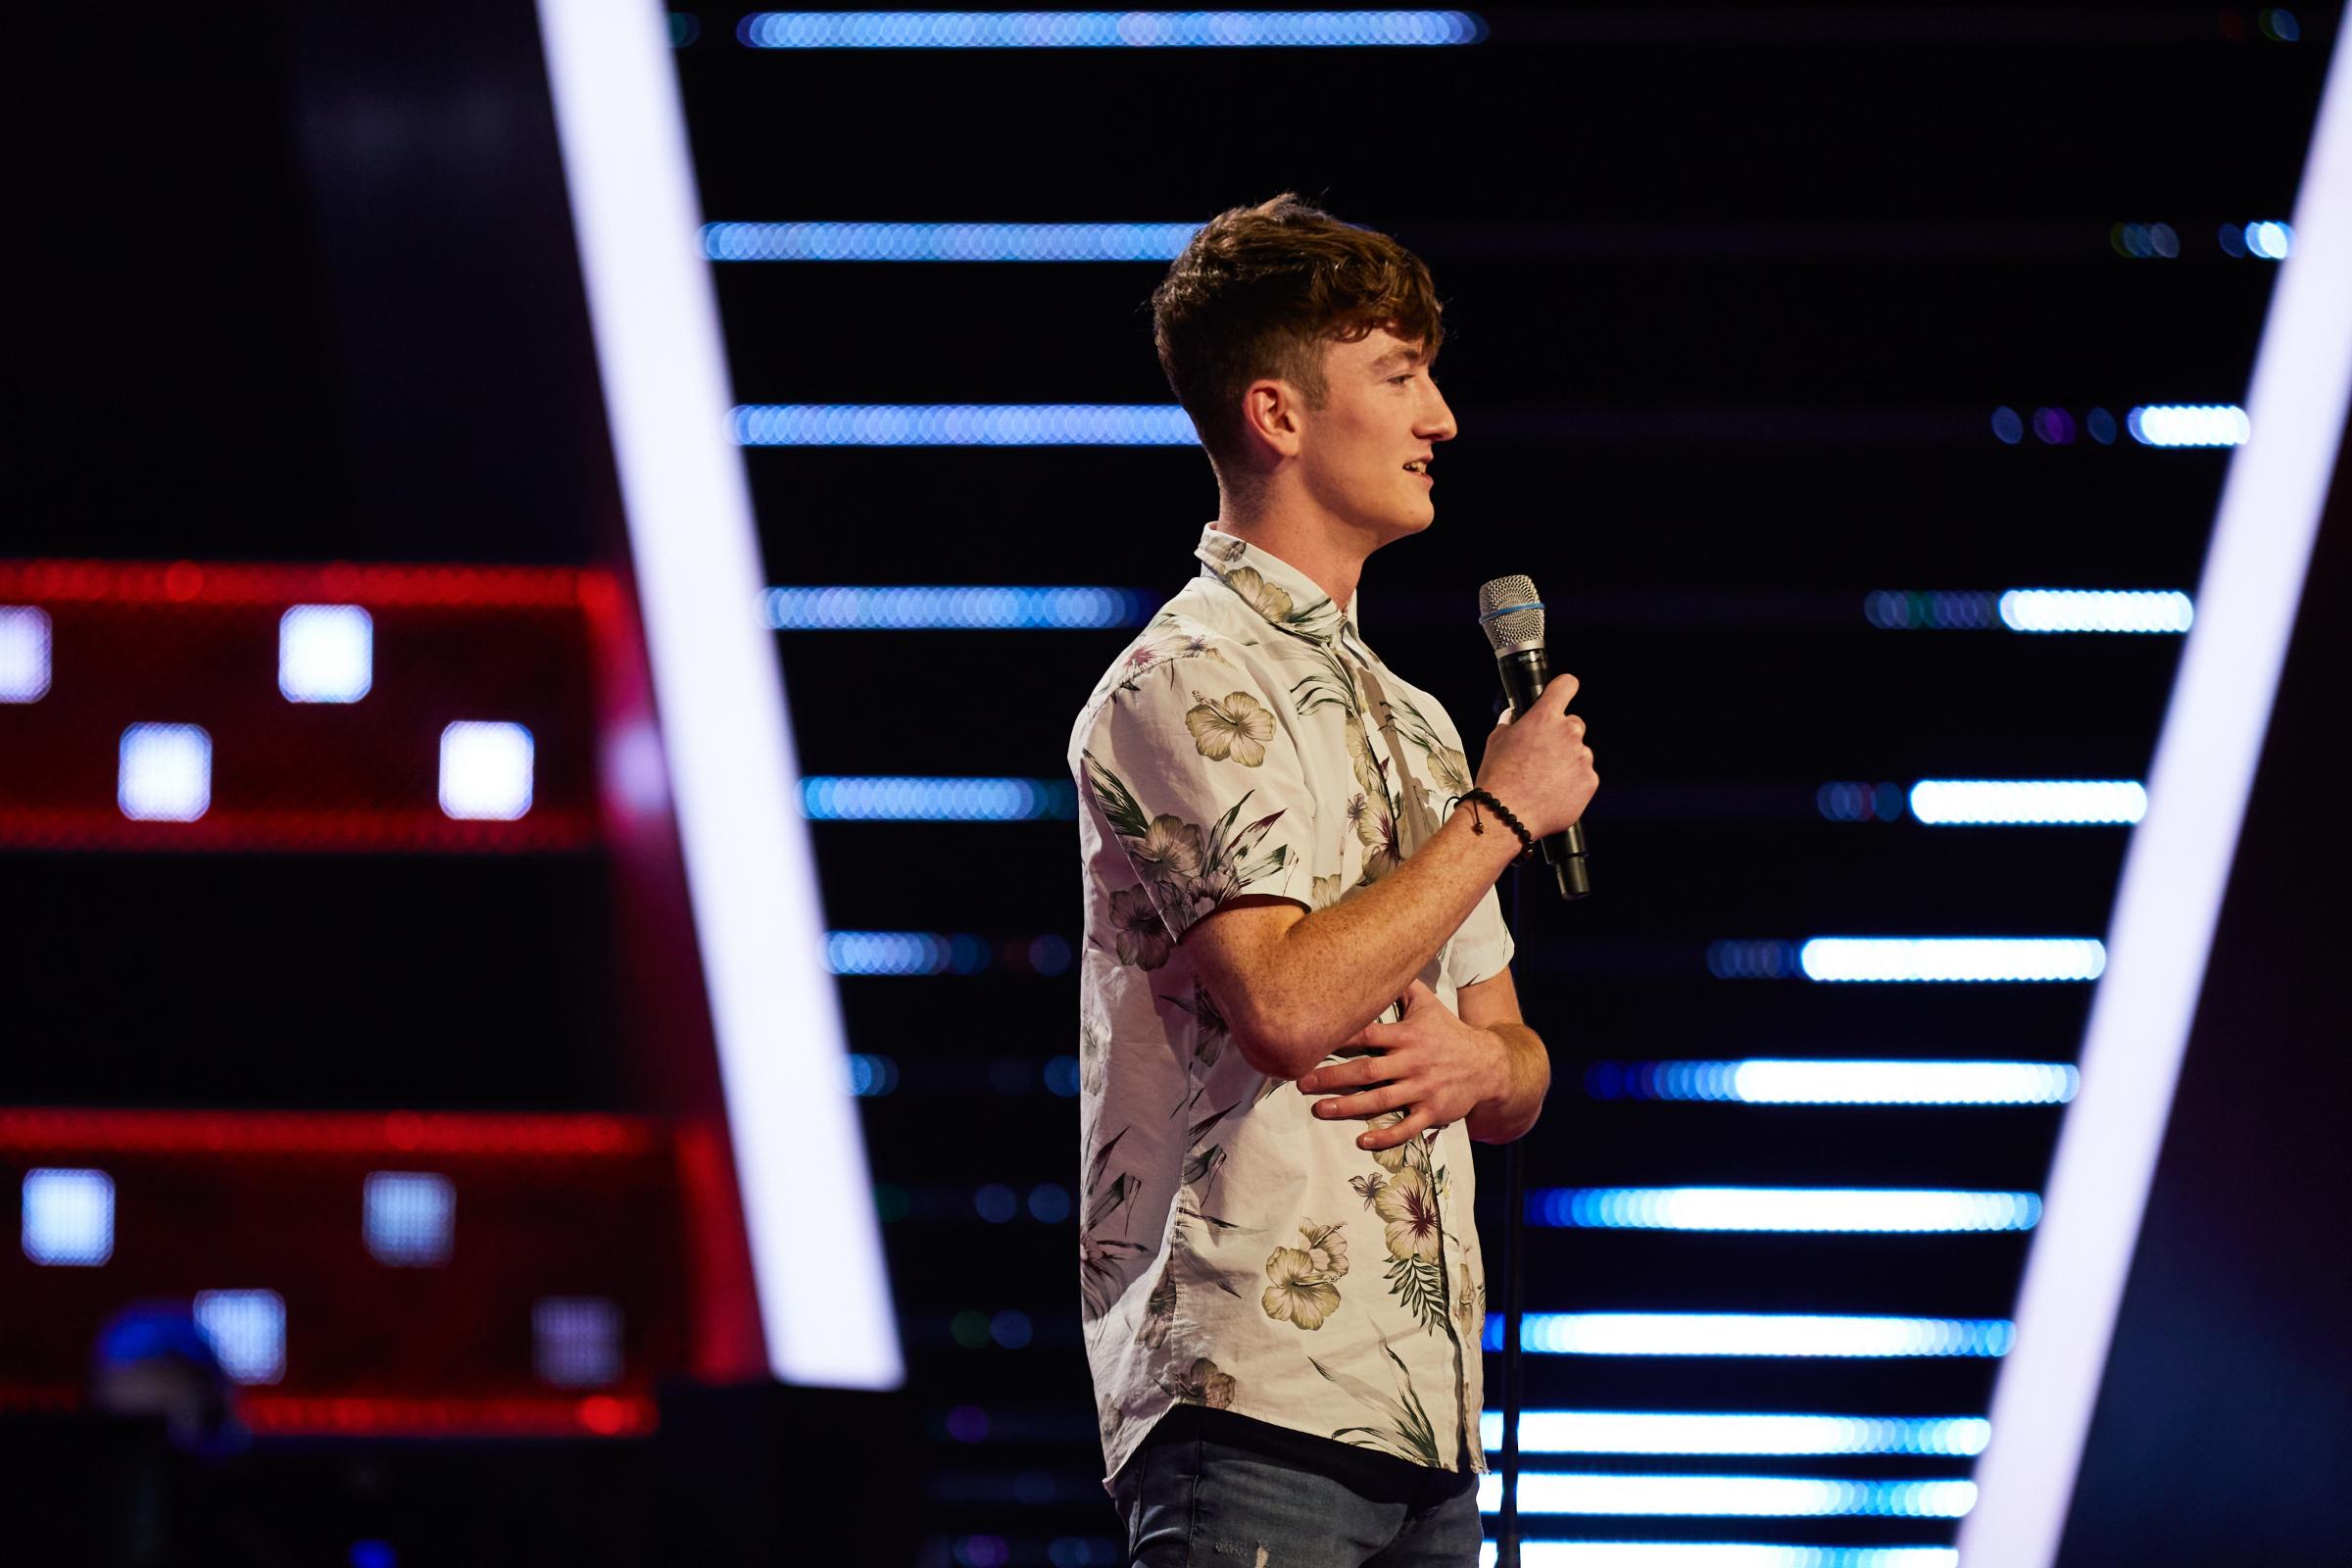 MADE IT: Cameron Ledwidge during his blind audition on The Voice UK. Picture courtesy of ITV Studios